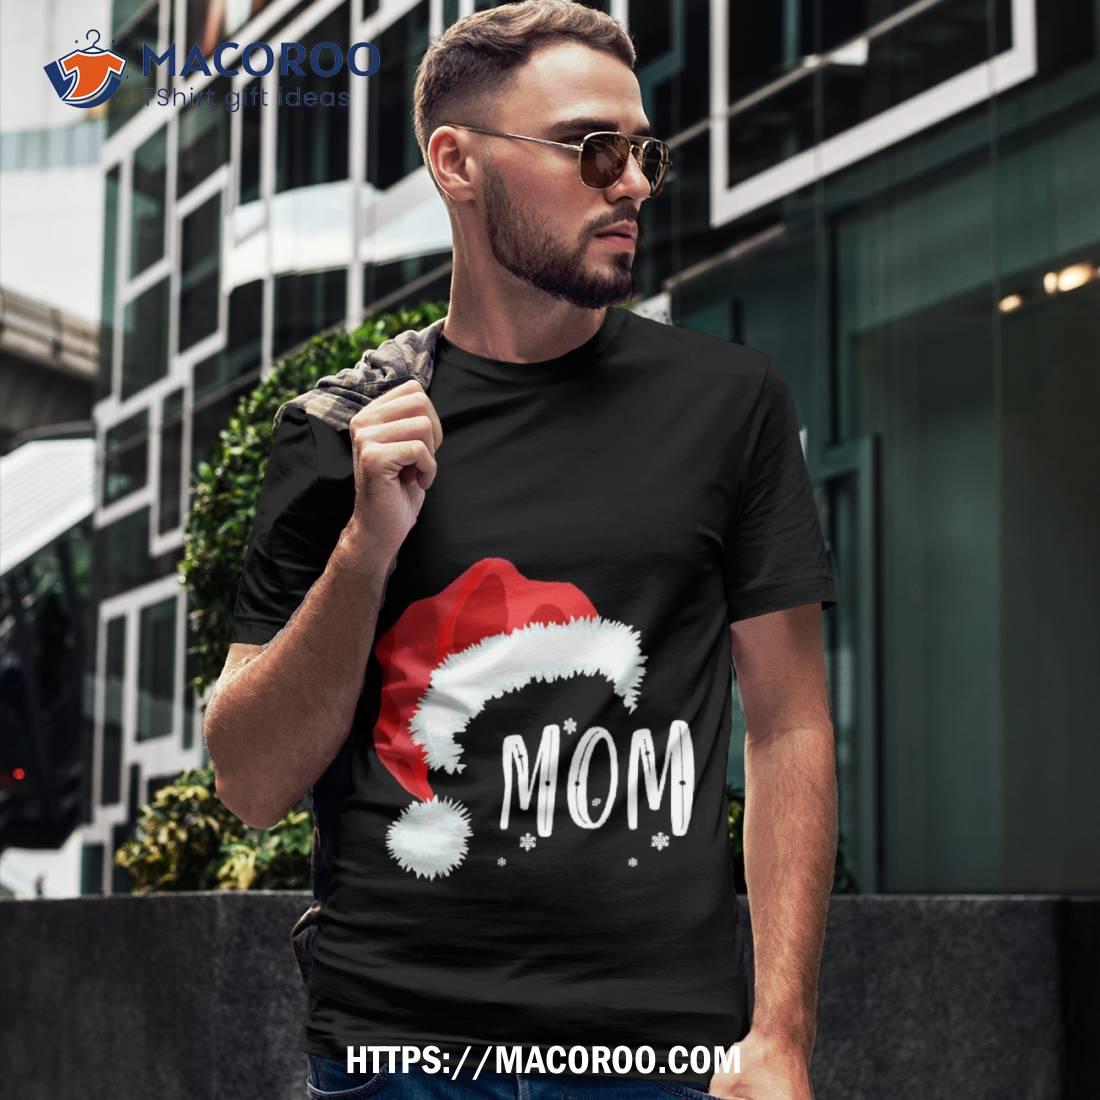 https://images.macoroo.com/wp-content/uploads/2023/08/christmas-as-mom-2020-santa-claus-funny-gift-for-shirt-good-christmas-gifts-for-your-mom-tshirt.jpg